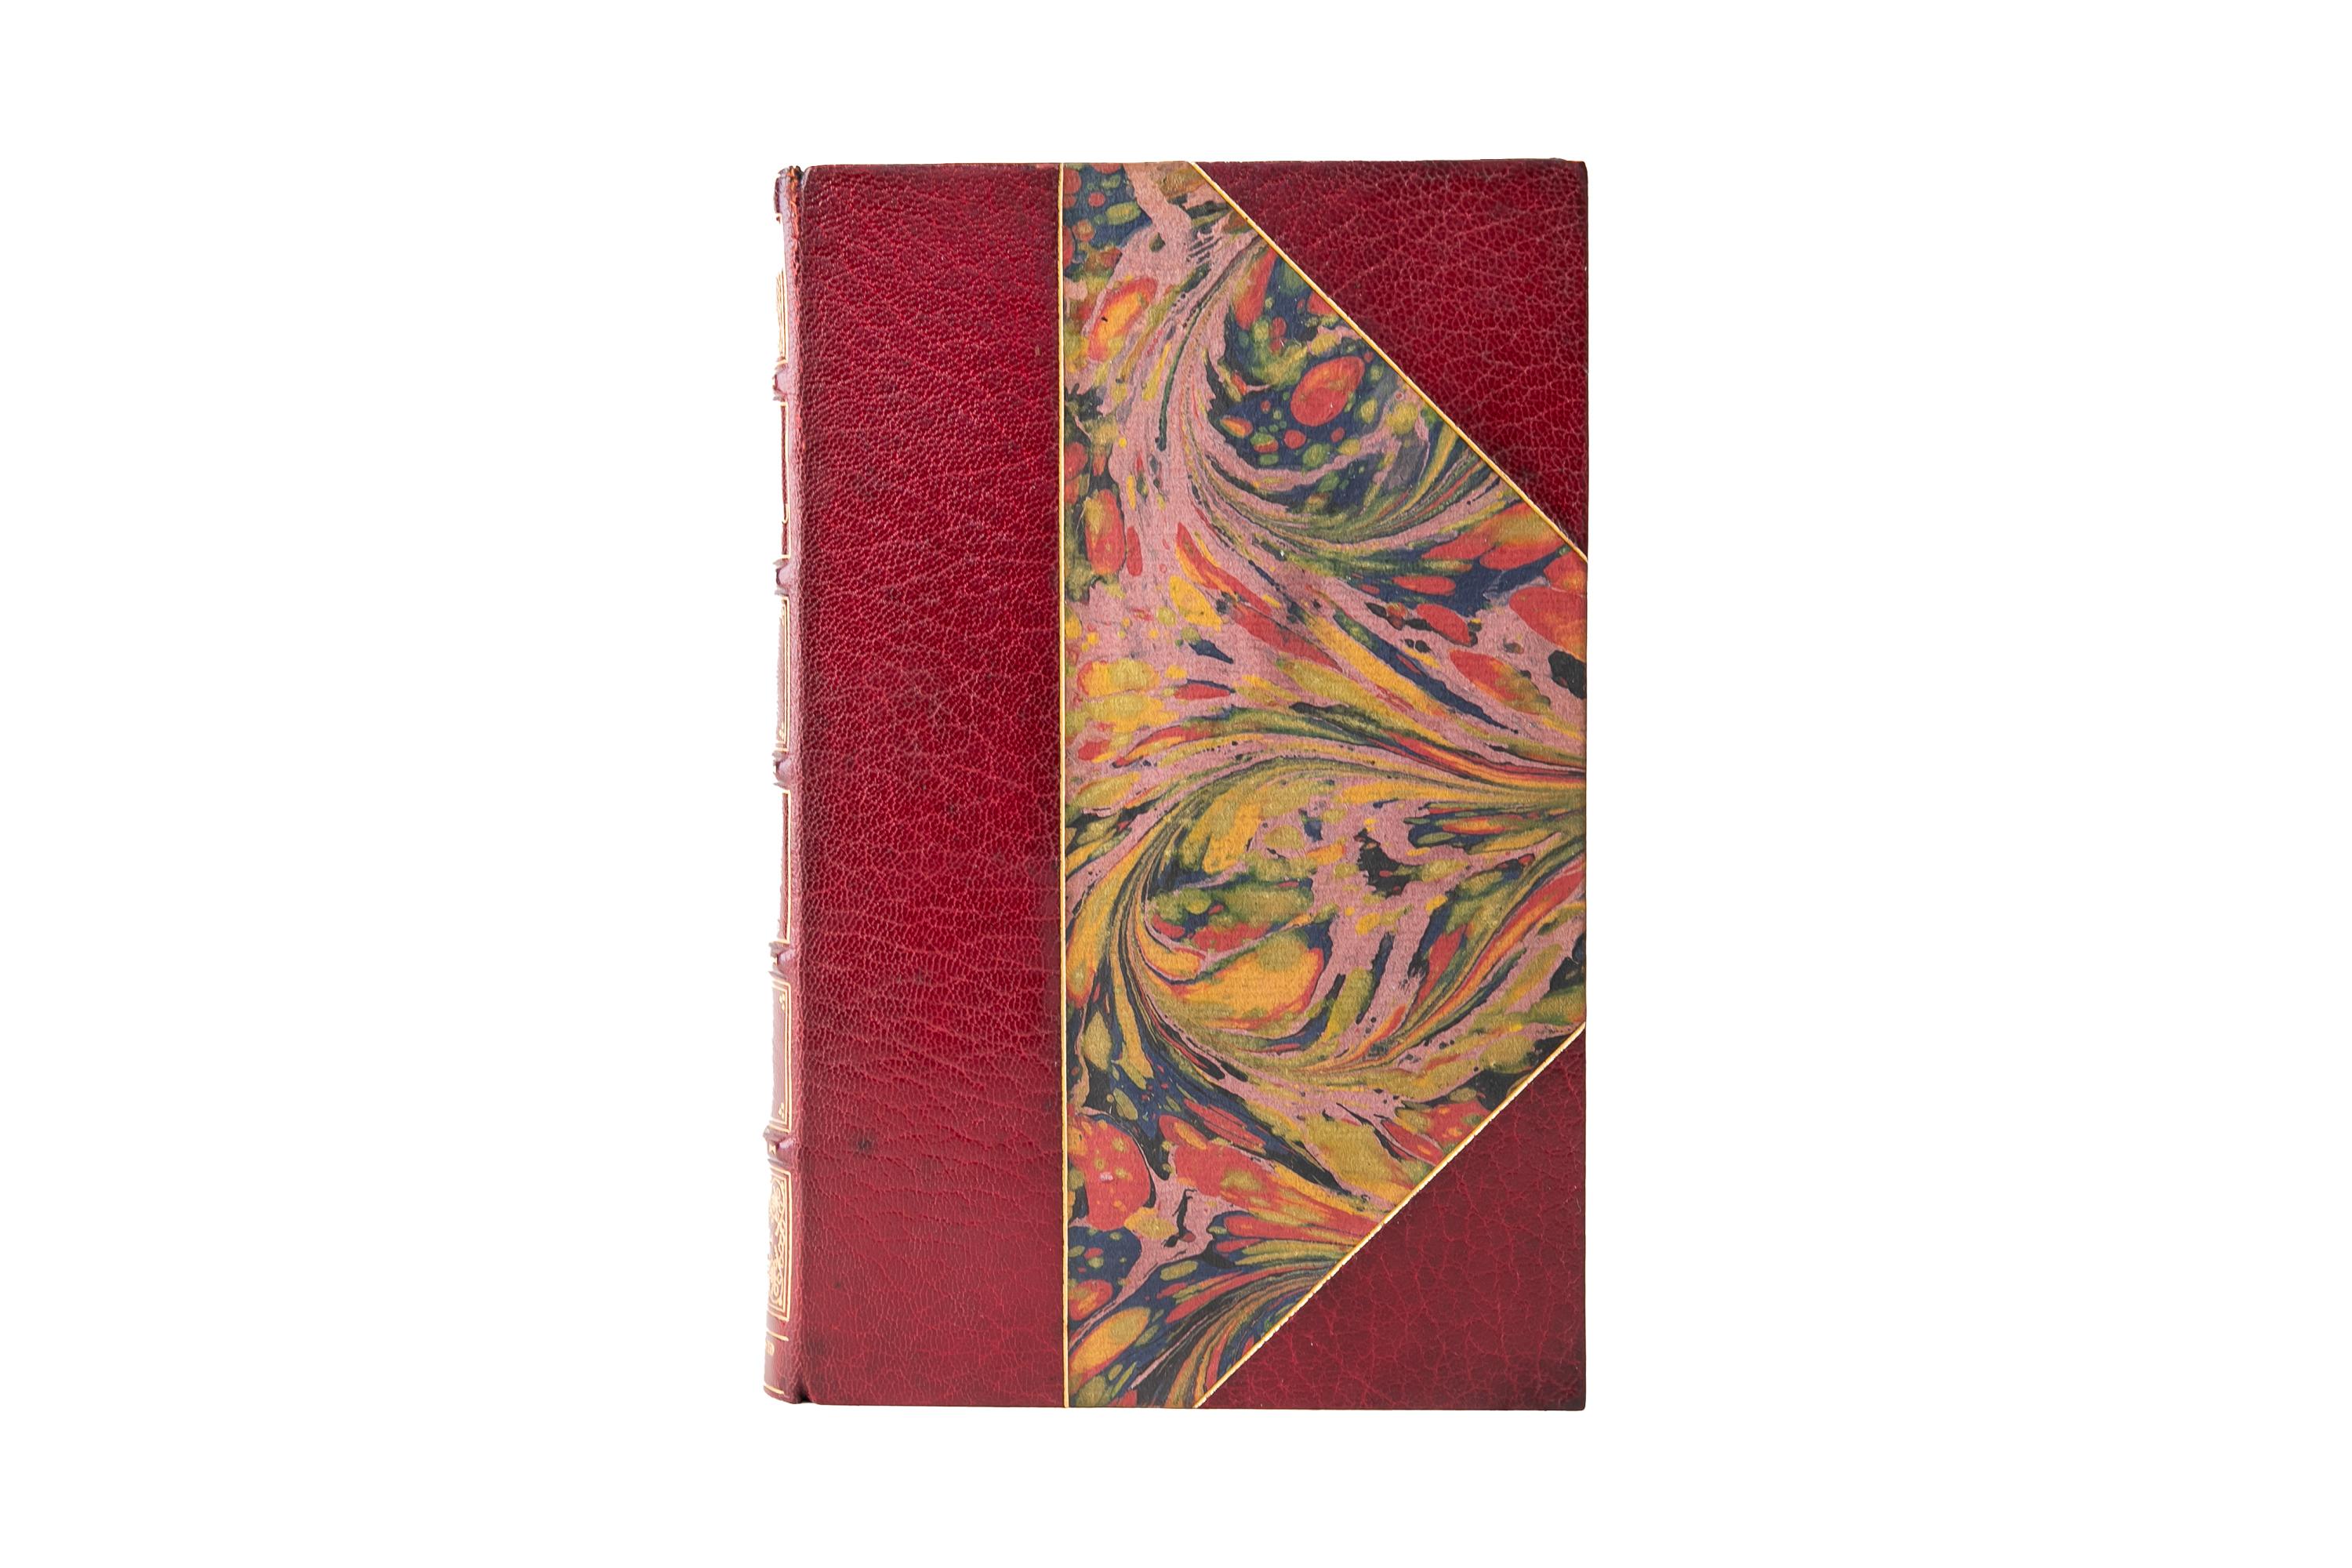 1 Volume. H. Noel Williams, The Fascinating Duc de Richelieu. First Edition. Bound by Bayntun in 3/4 wine morocco and marbled boards bordered in gilt-tooling with a gilt-tooled raised band spine. all edges gilt with marbled endpapers. 20 extra